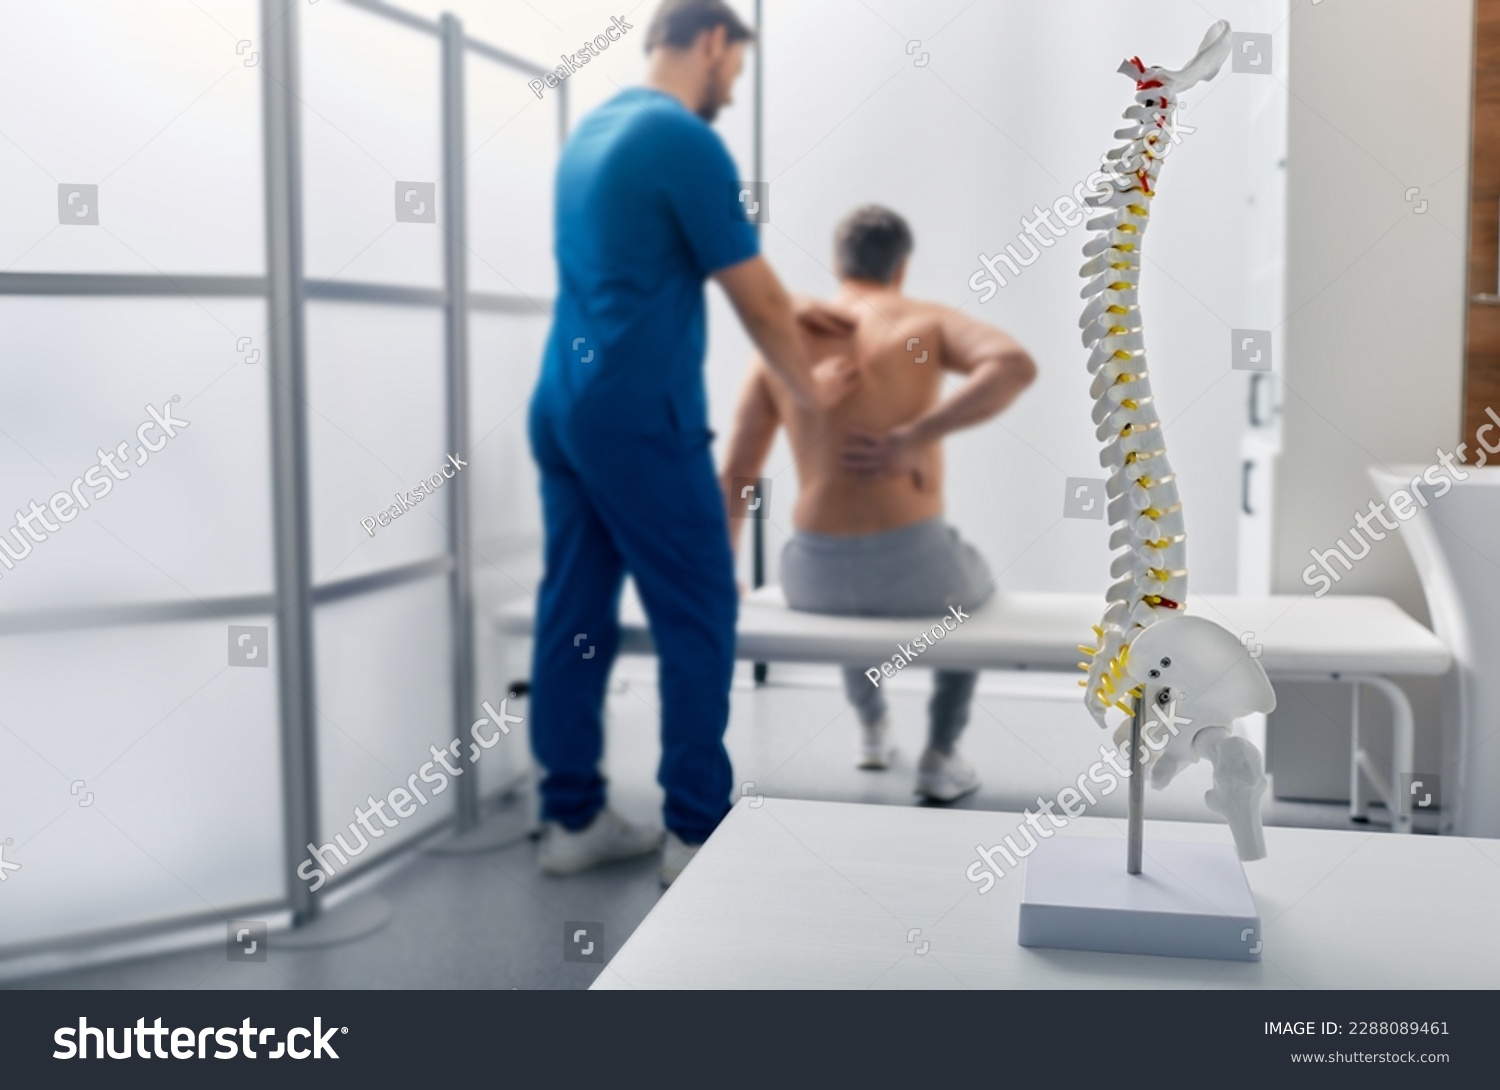 Anatomical model of spine on table in manual therapist's office. Adult man patient during spinal exam by physiotherapist on background, soft focus #2288089461